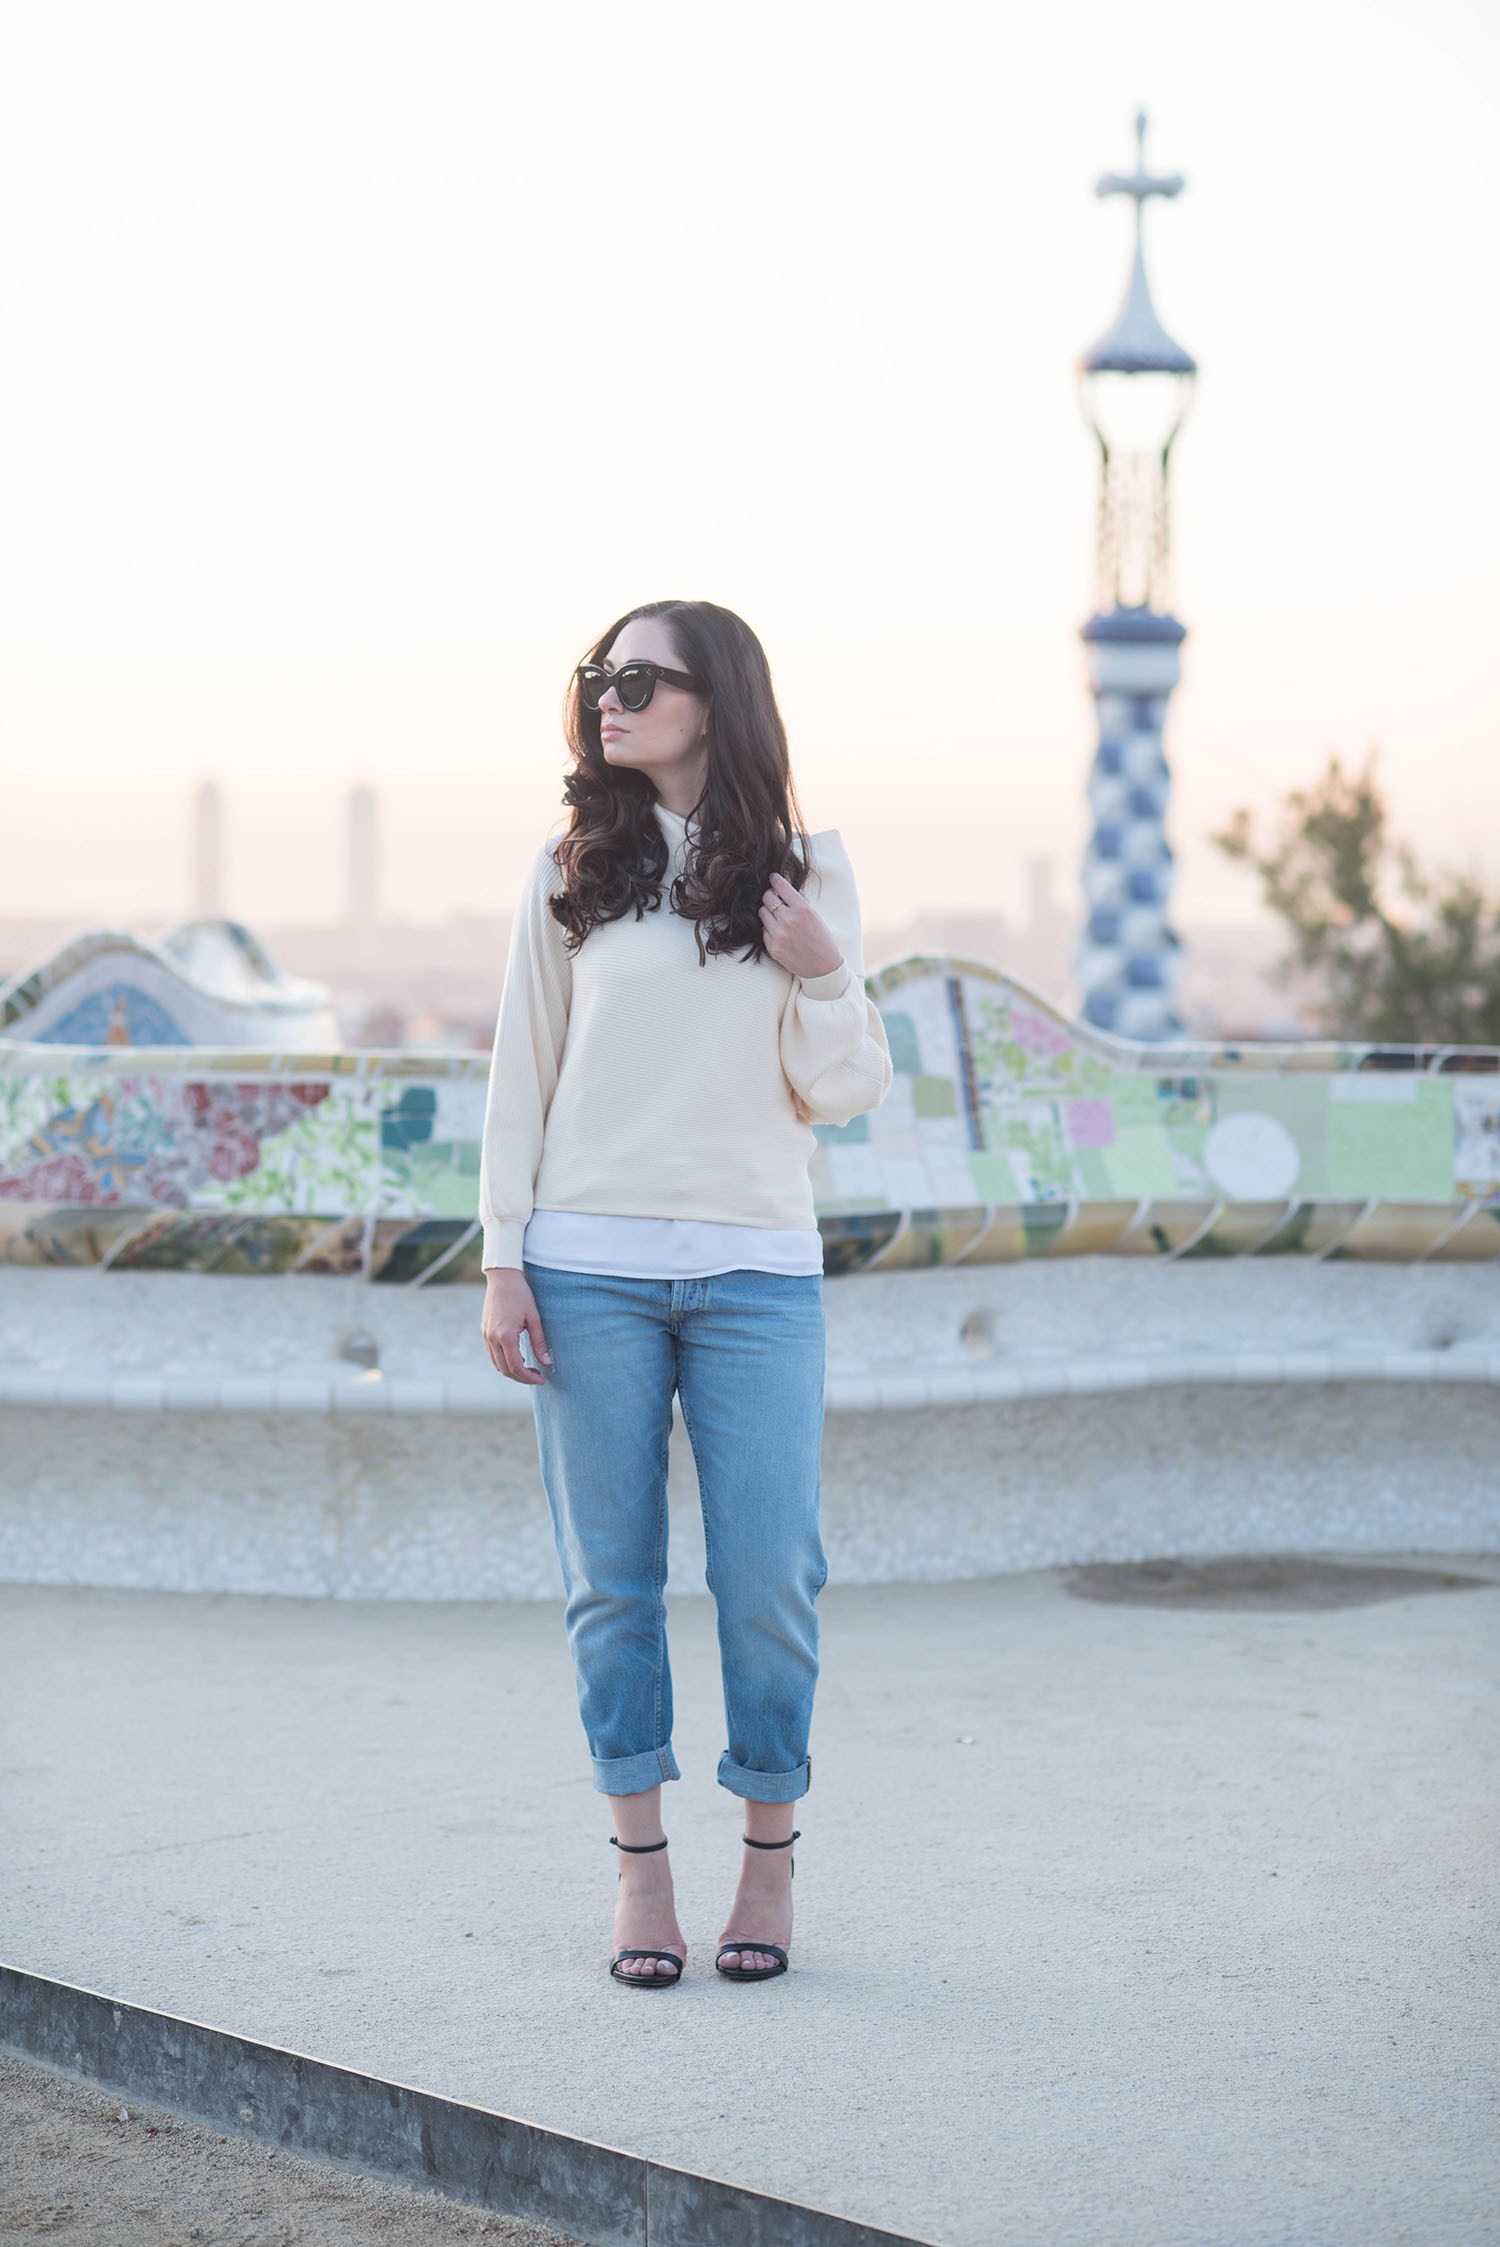 Winnipeg fashion blogger Cee Fardoe of Coco & Vera stands at Parc Guell in Barcelona wearing a Zara blush sweater and Steve Madden Stecy sandals